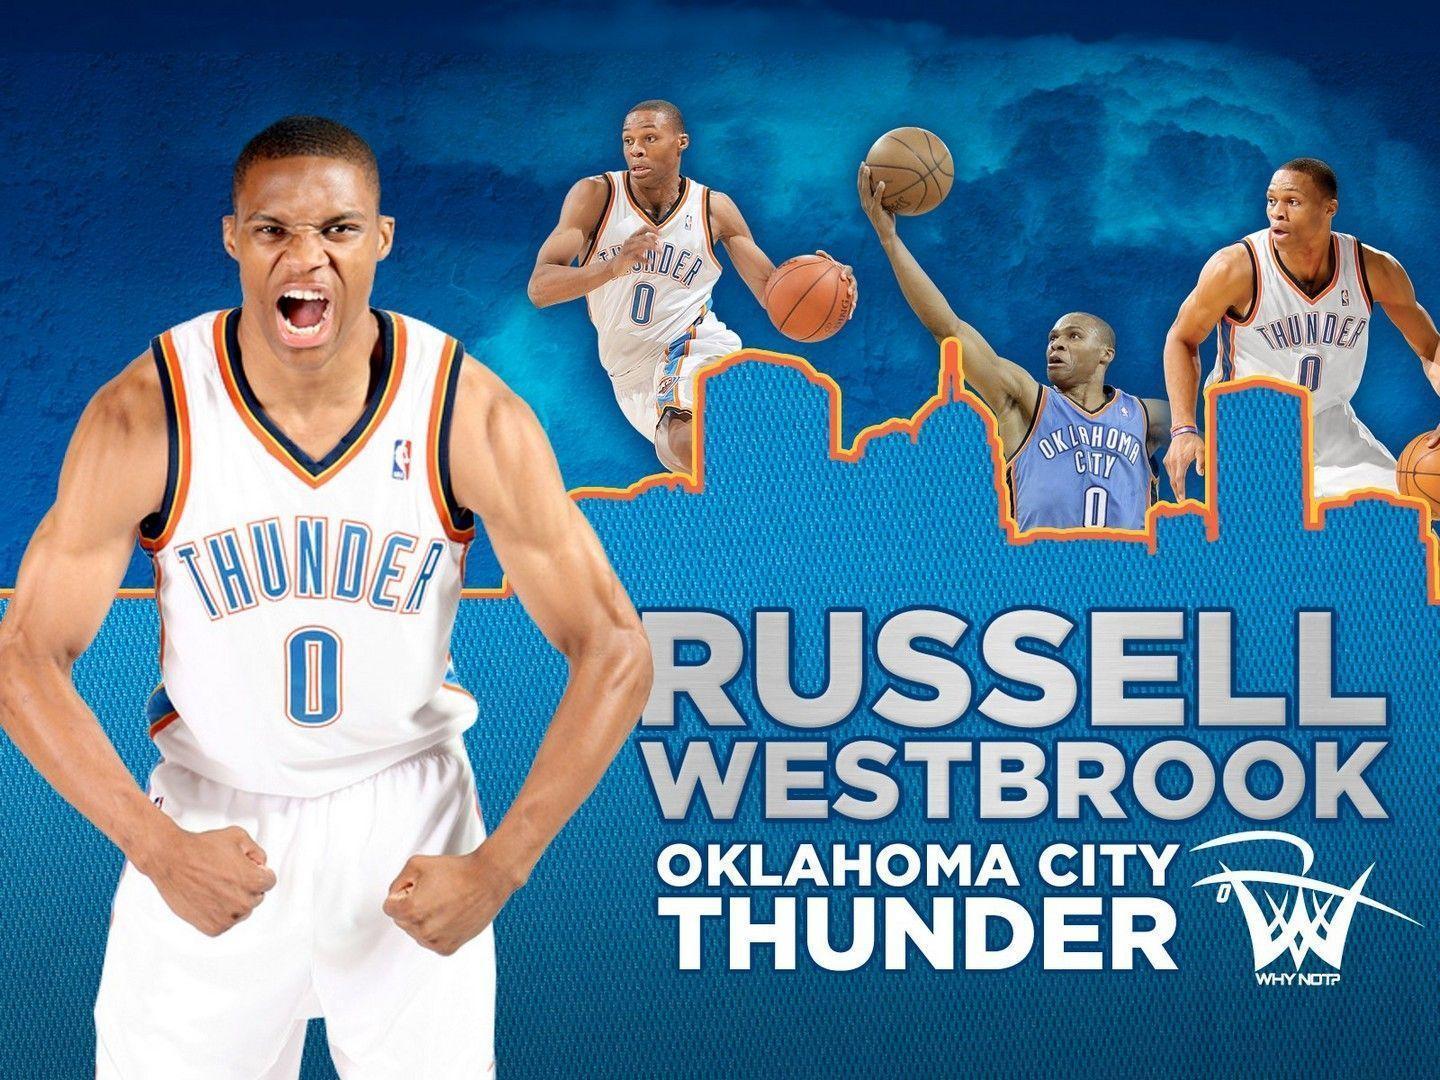 Its All About Basketball: Russell Westbrook New HD Wallpaper 2012